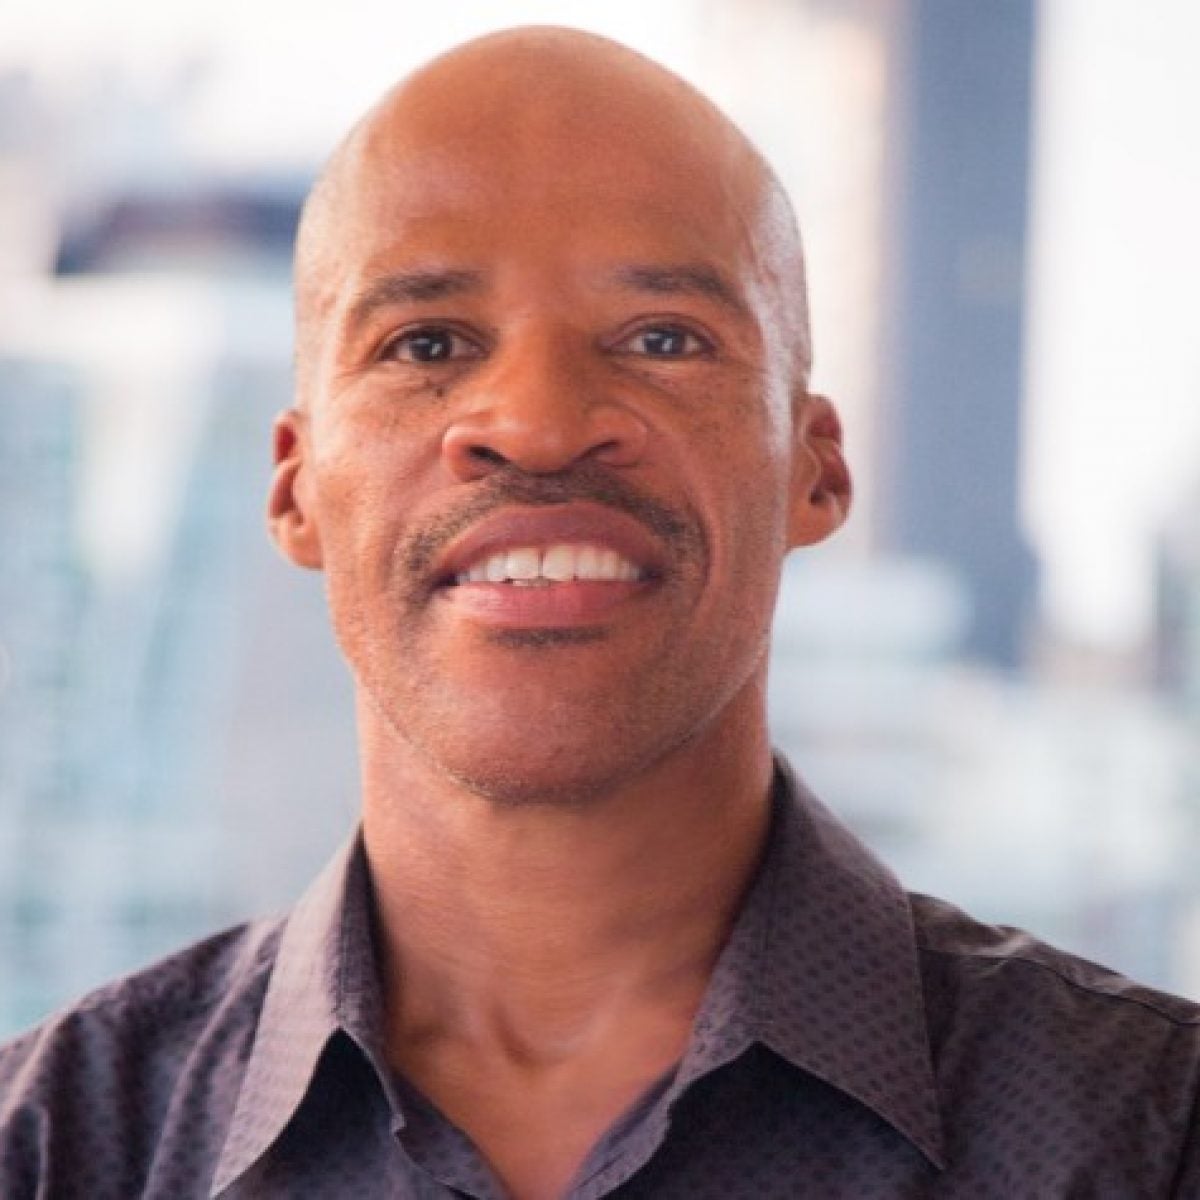 BeautyStat Cosmetics Founder Ron Robinson Shares Tips For Launching A Successful Beauty Business